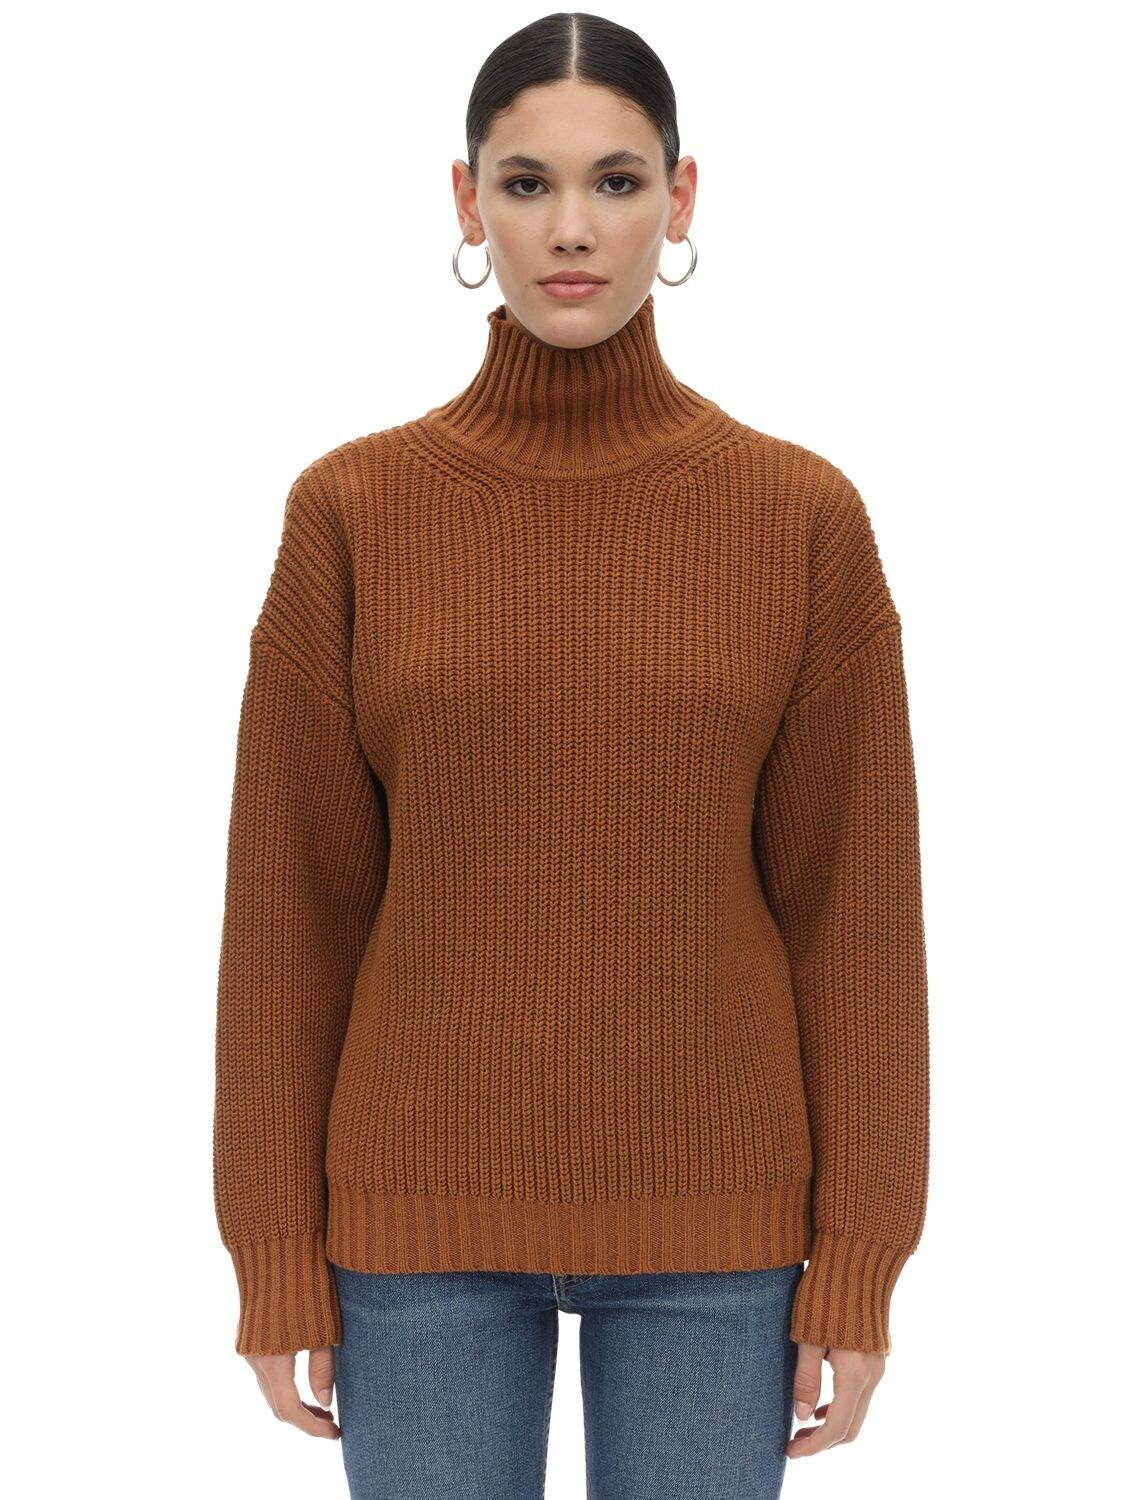 MSGM Wool & Acrylic Knit Sweater in Camel (Brown) - Lyst